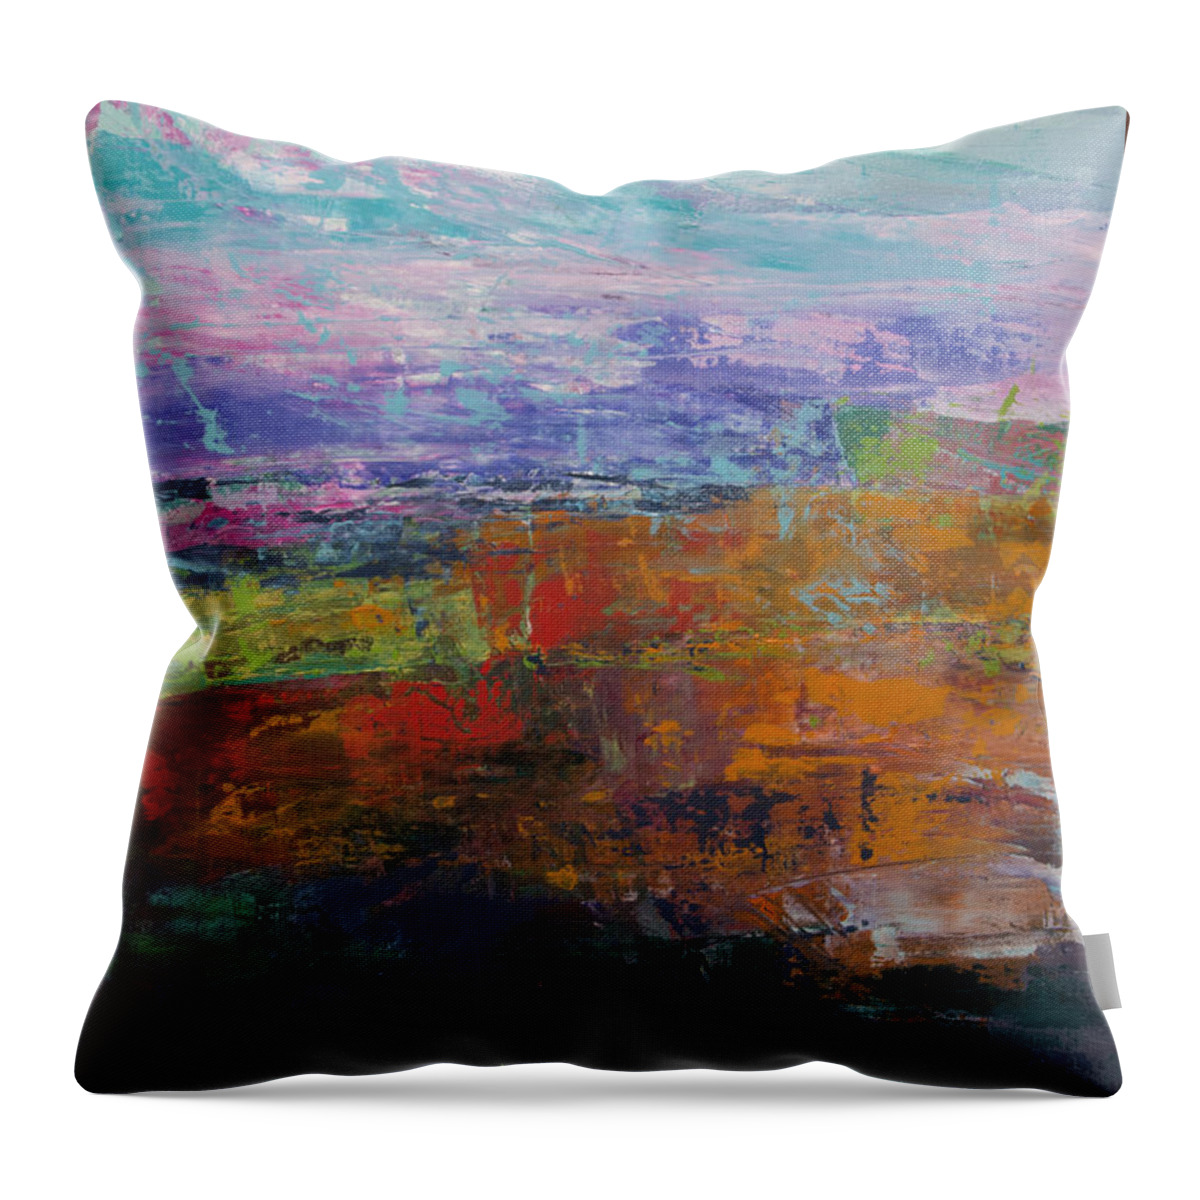 Landscape Throw Pillow featuring the painting It Rained That Day by Linda Bailey